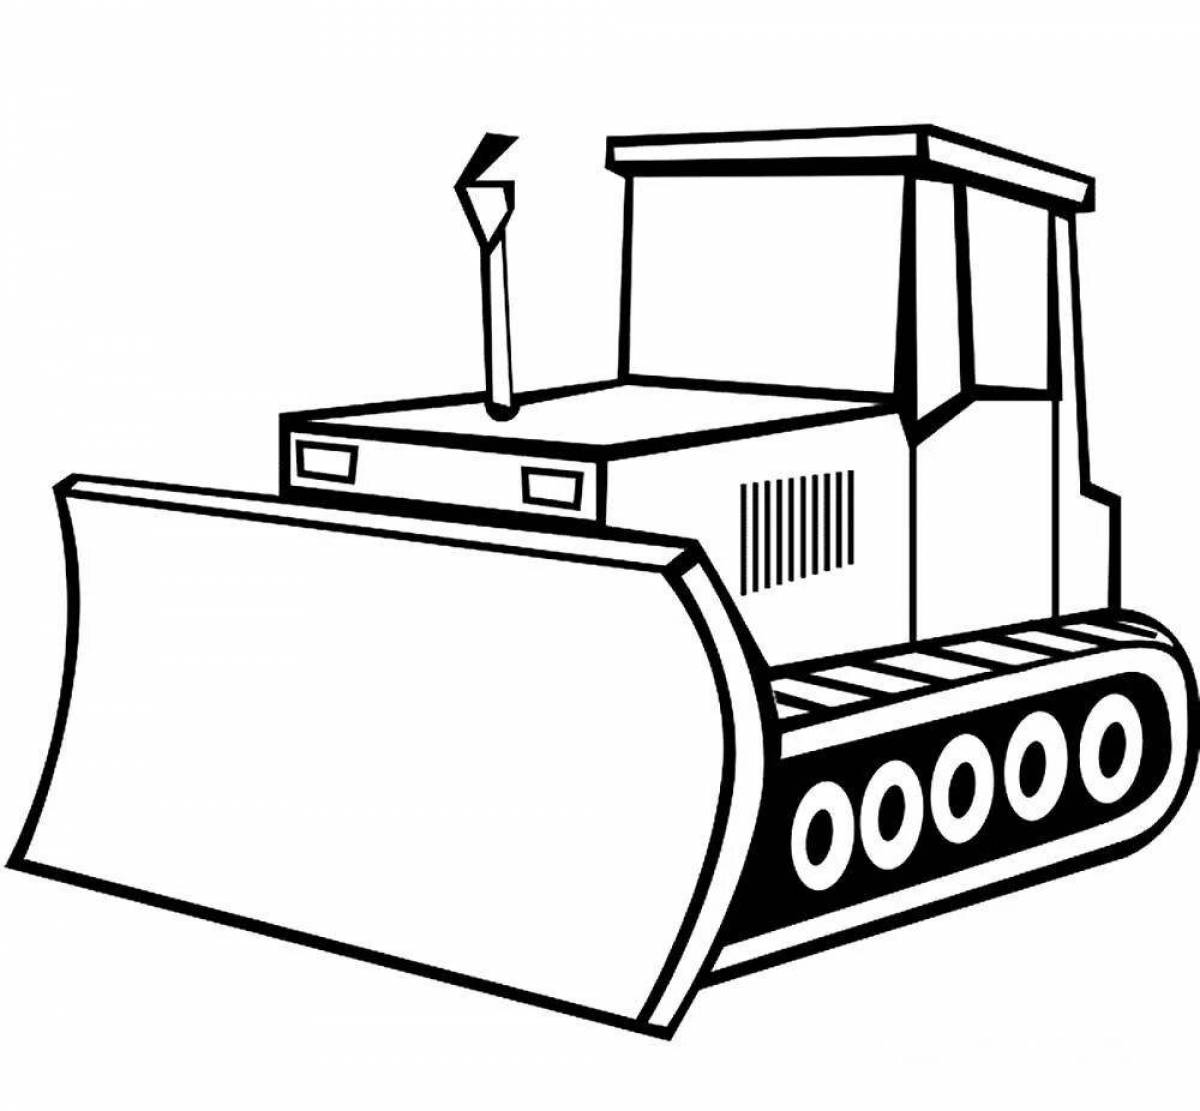 Shiny Bulldozer Coloring Page for Toddlers